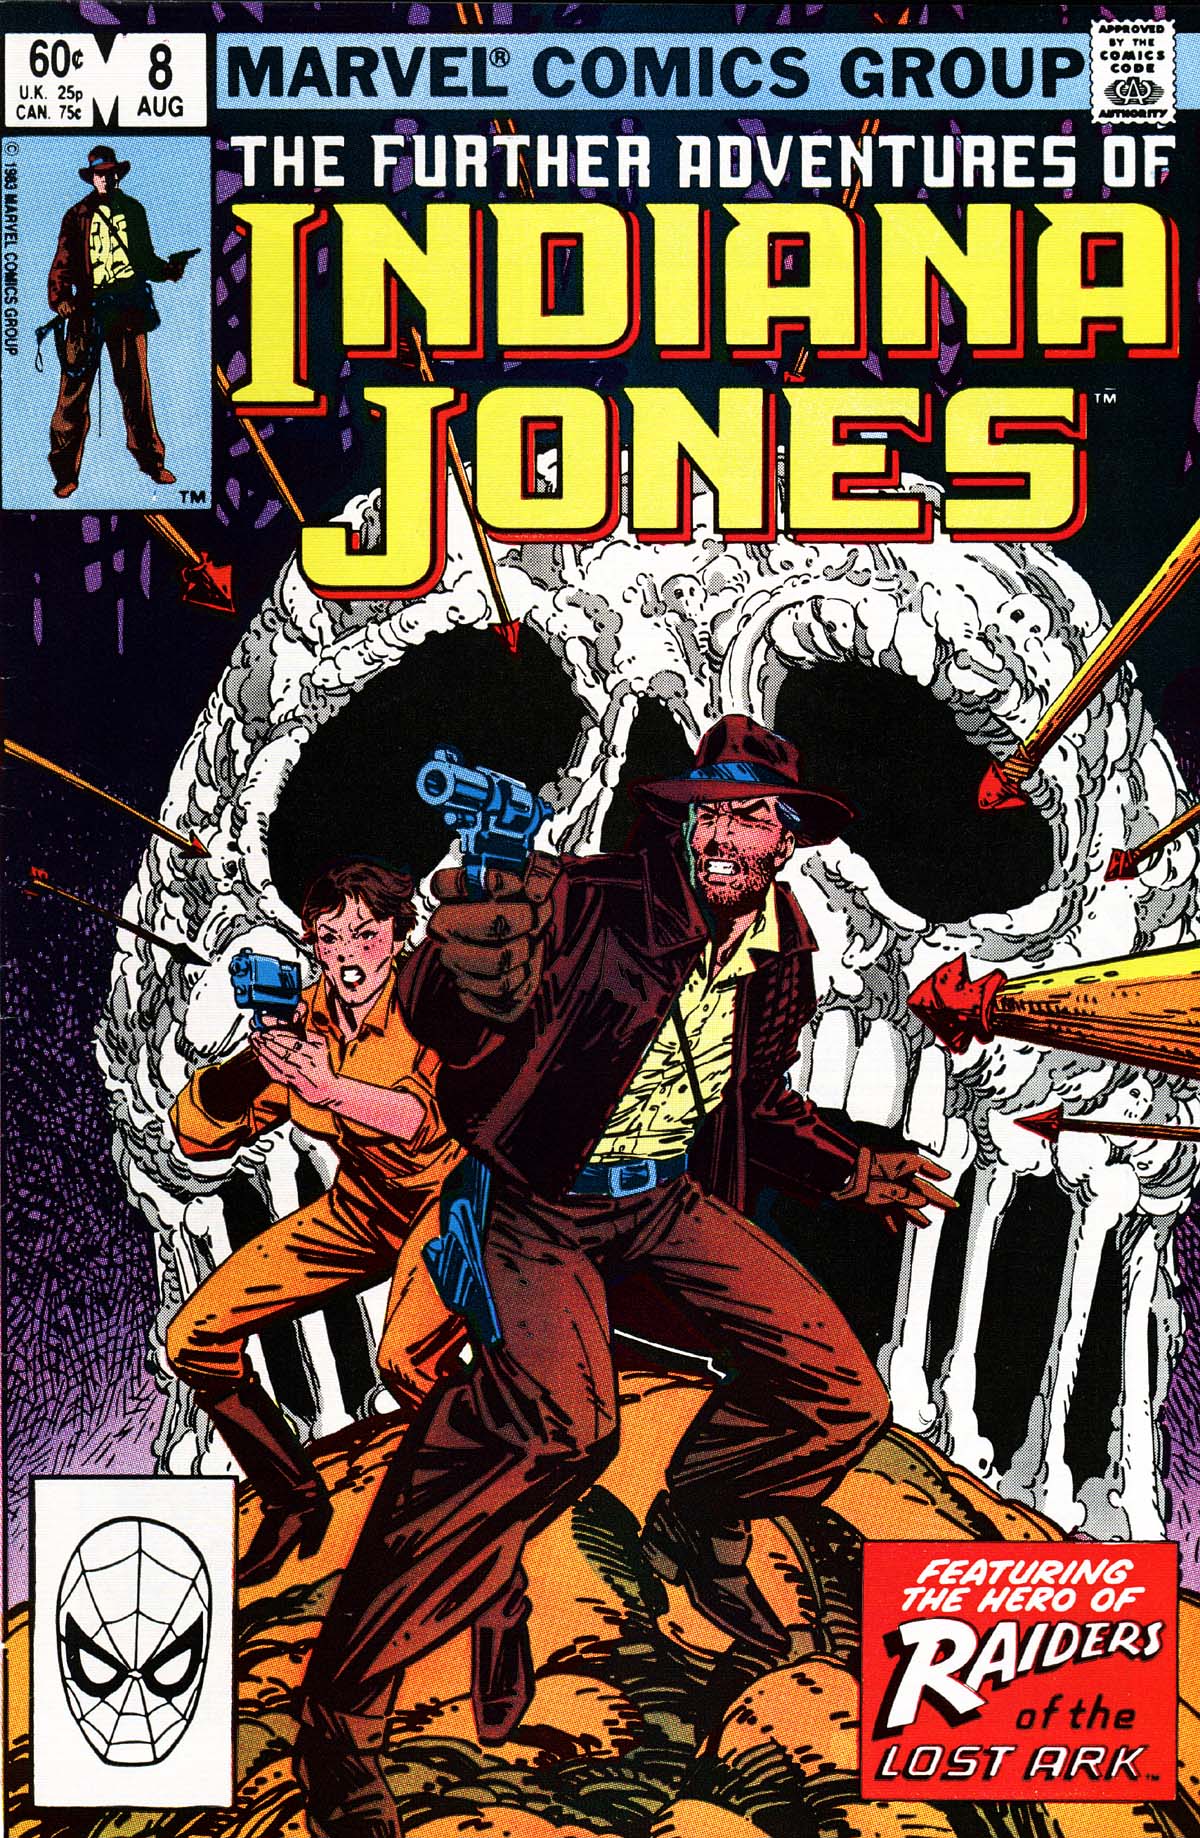 Read online The Further Adventures of Indiana Jones comic -  Issue #8 - 1